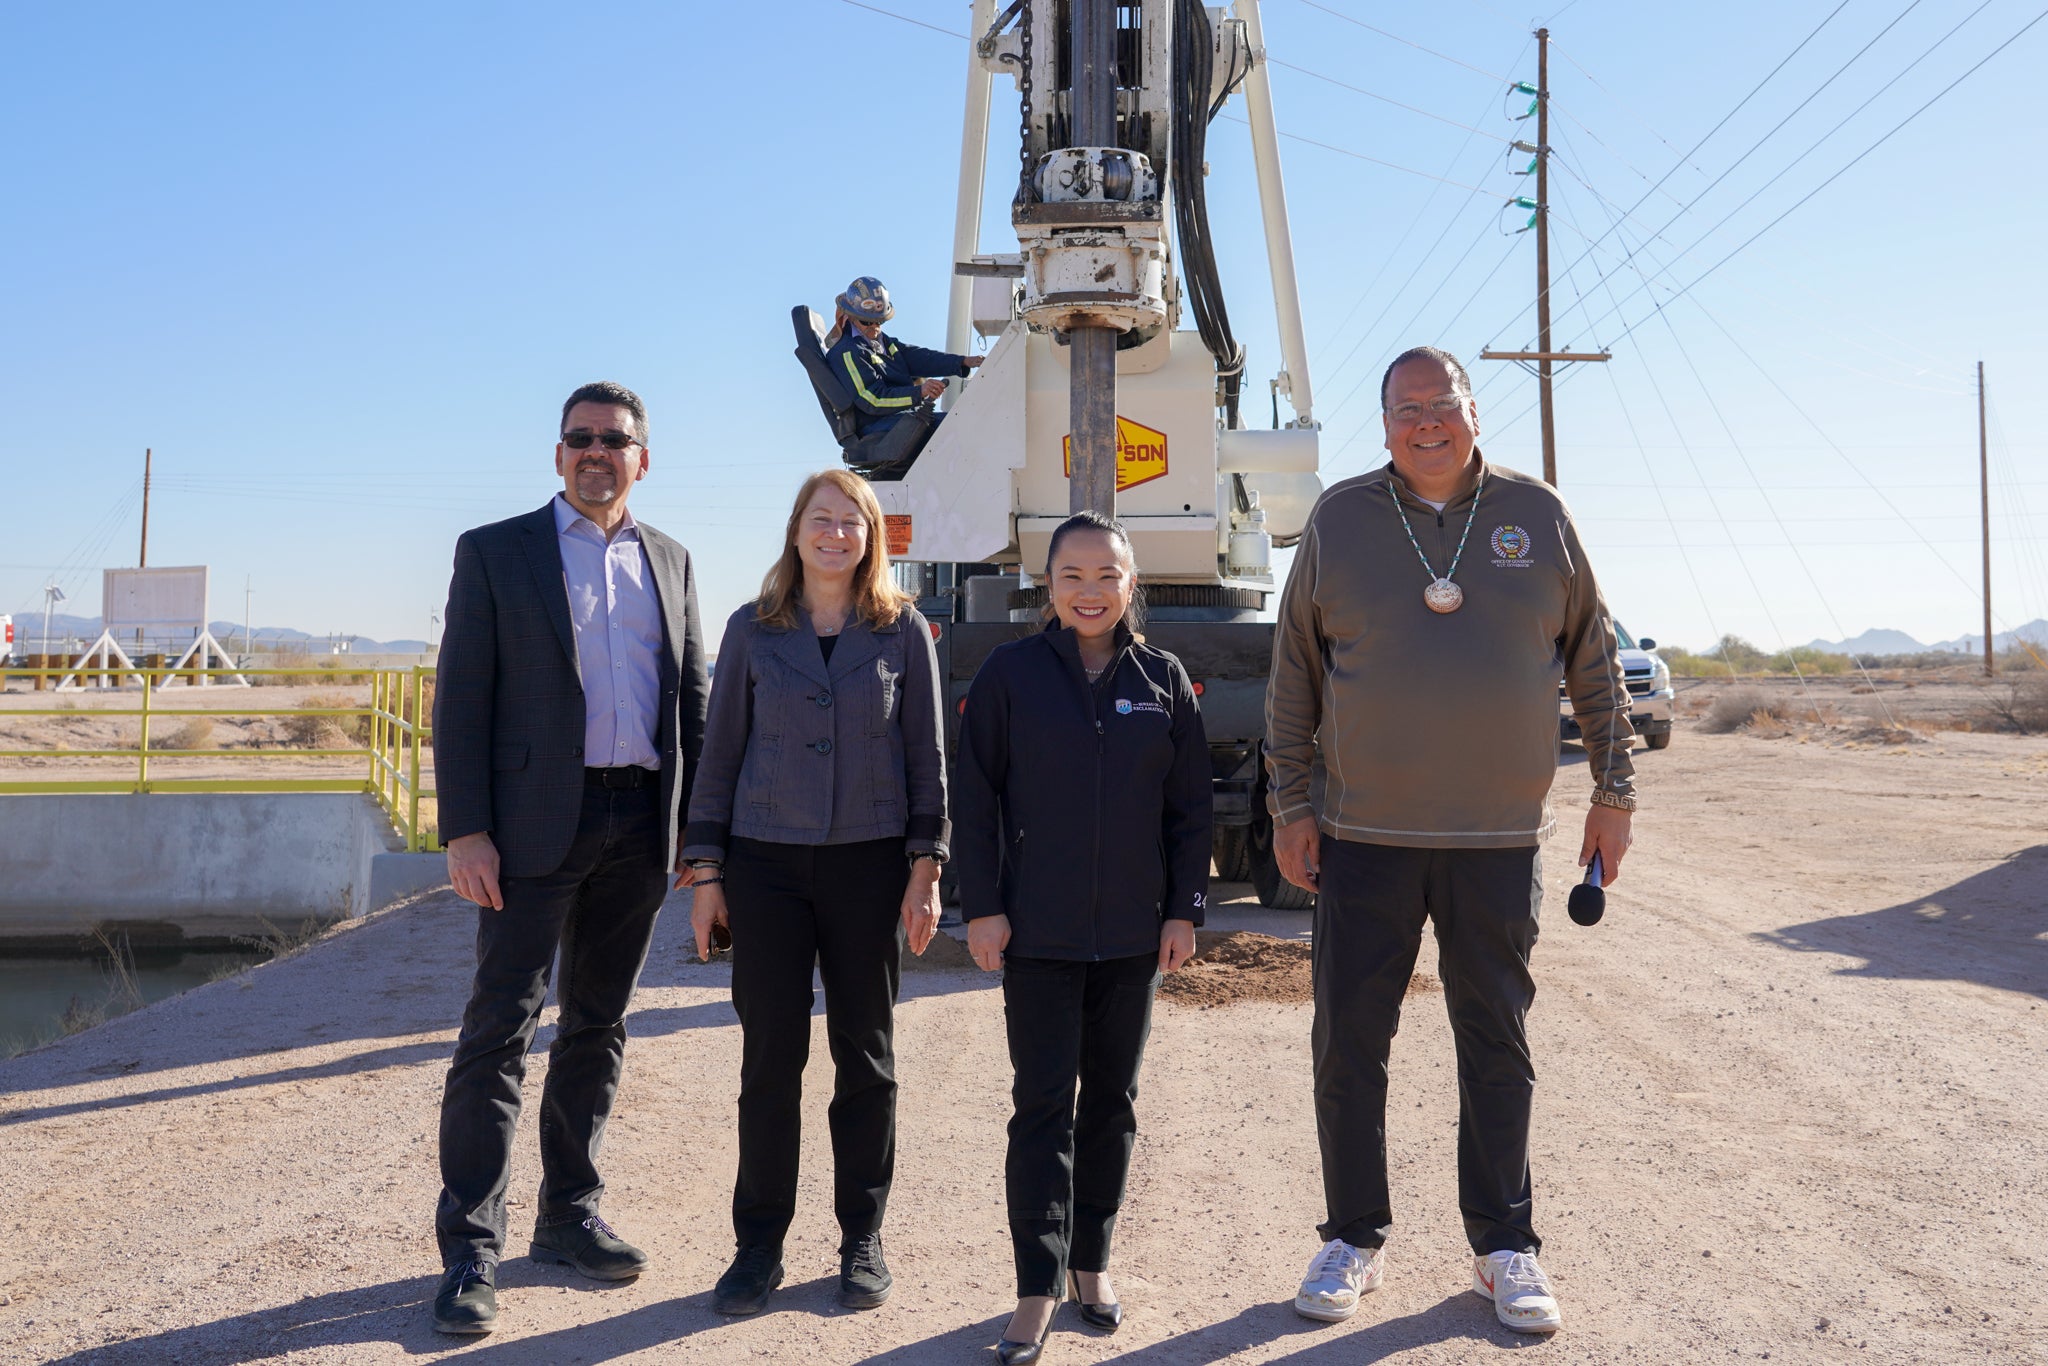 At the 8 December ground-breaking ceremony, Gila River Indian Community Governor Stephen Lewis (right) stands with Bureau of Reclamation Commissioner Camille Touton, Acting Principal Deputy Secretary of the Interior Laura Daniel-Davis and USACE Assistant Secretary of Civil Works Michael Connor.